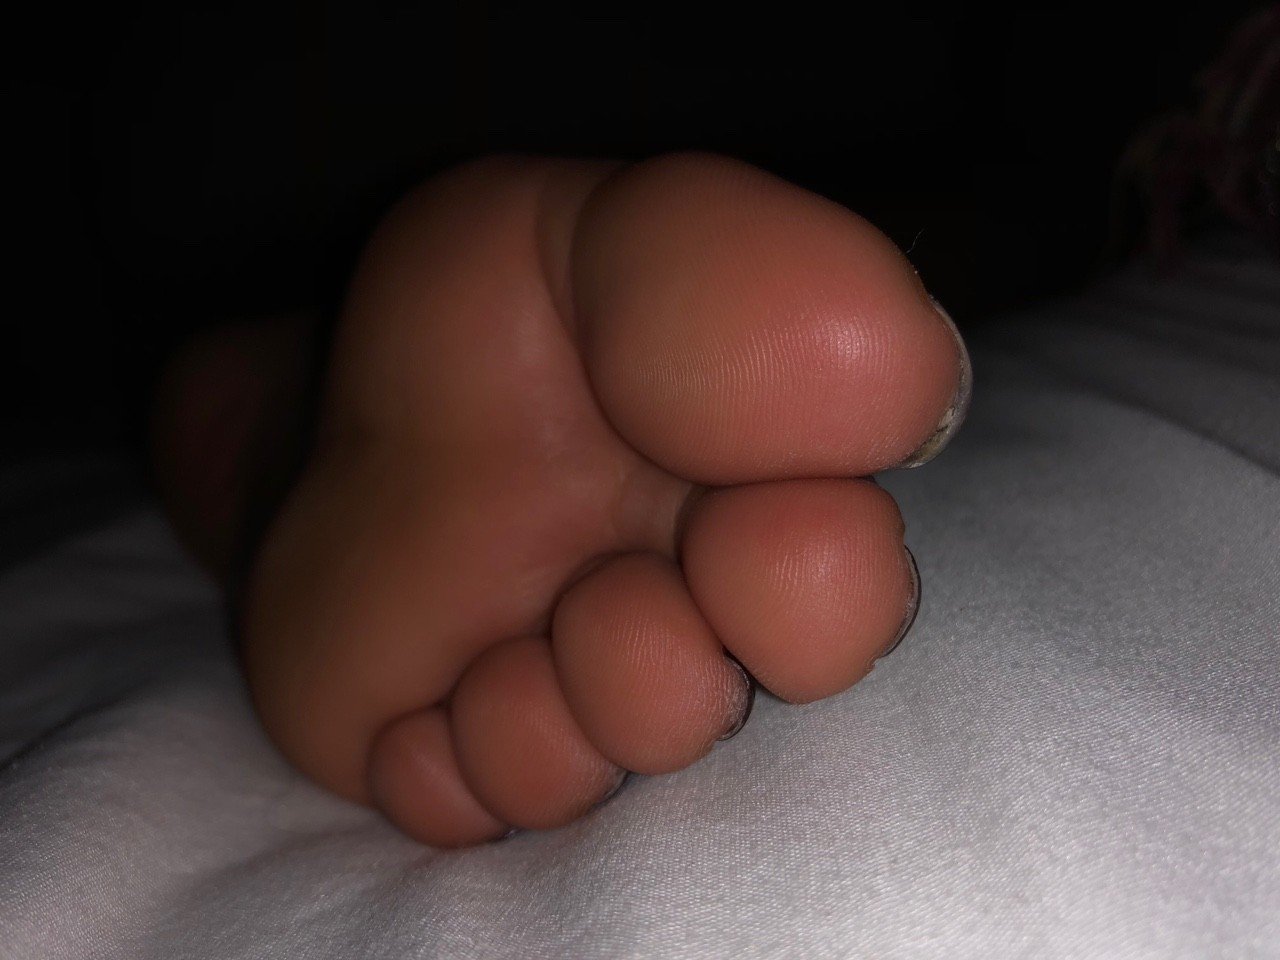 Photo by Nilegoddess with the username @Nilegoddess, who is a star user,  November 4, 2018 at 8:47 AM and the text says 'Drank too much. Passed out and got molested. Loved it  #drunk  #feet  #teen  #sexy  #slut  #toes  #passed  #out  #party  #molested  #sleeping  #legs  #ass  #pussy  #young  #barely  #legal  #college  #girl  #panties  #thing  #g  #stirng  #ankles  #nude..'